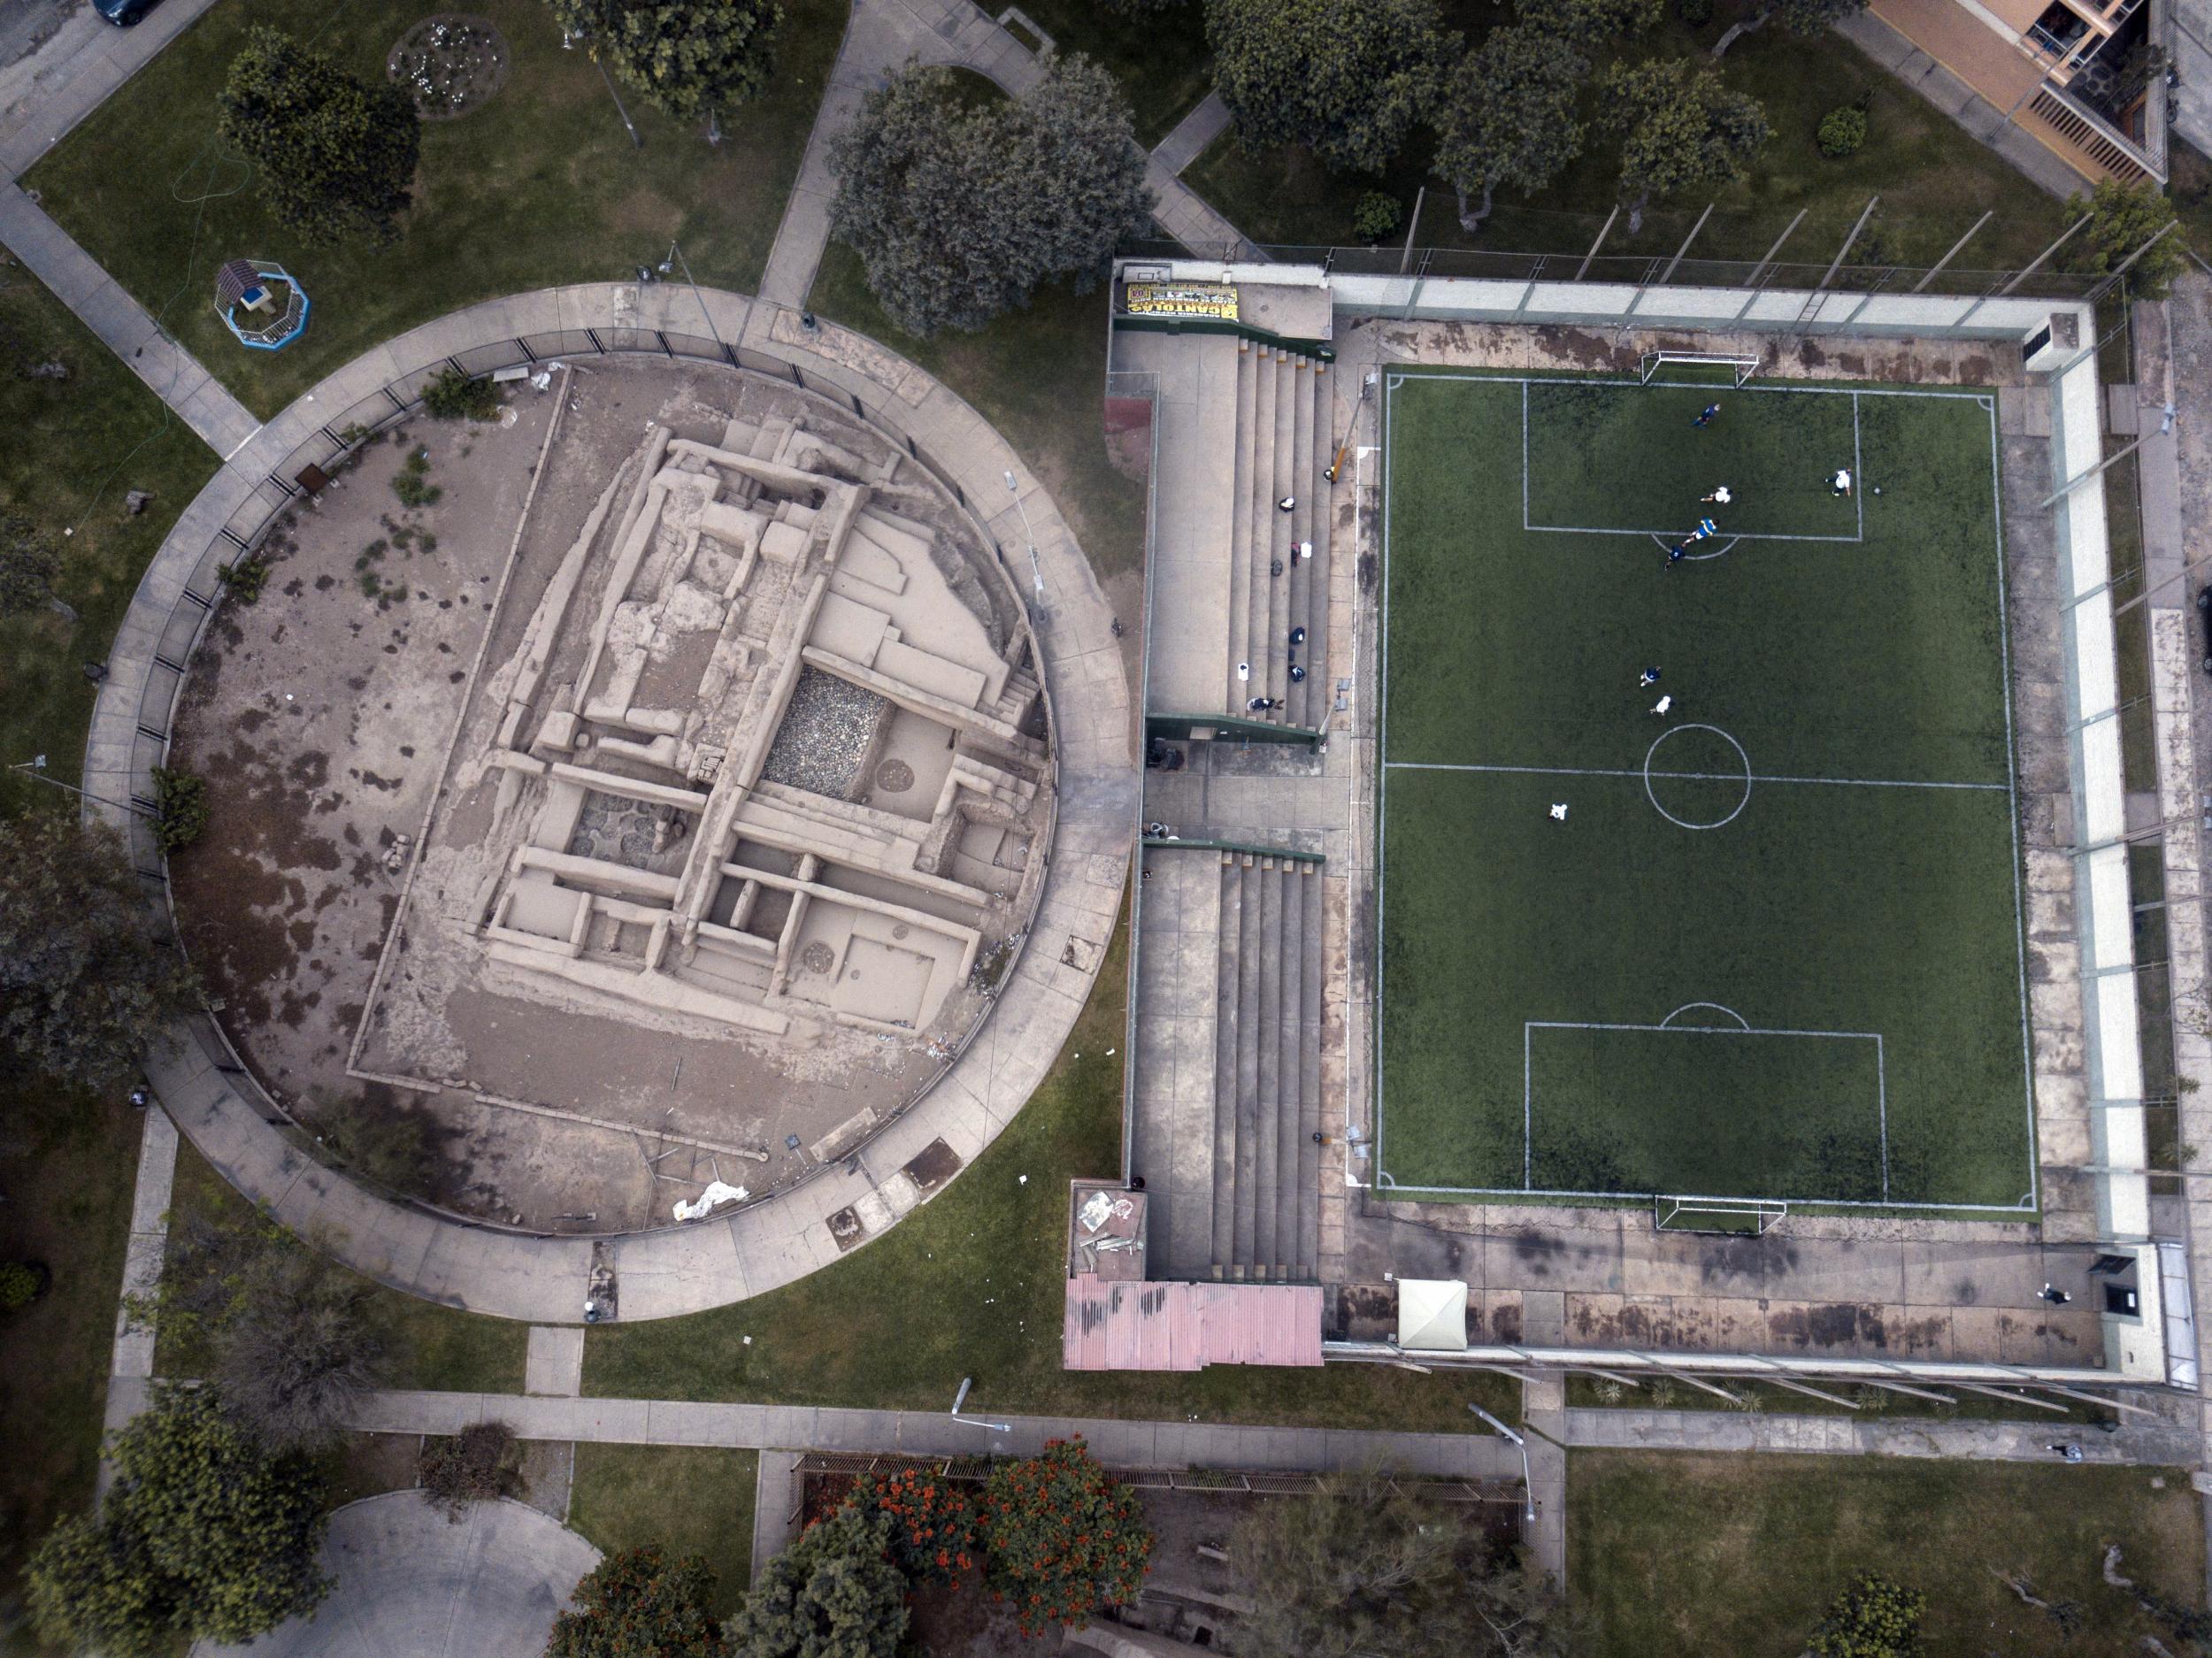 Pre-Columbian archeological site La Luz is flanked by a private soccer field players rent in Lima, Peru